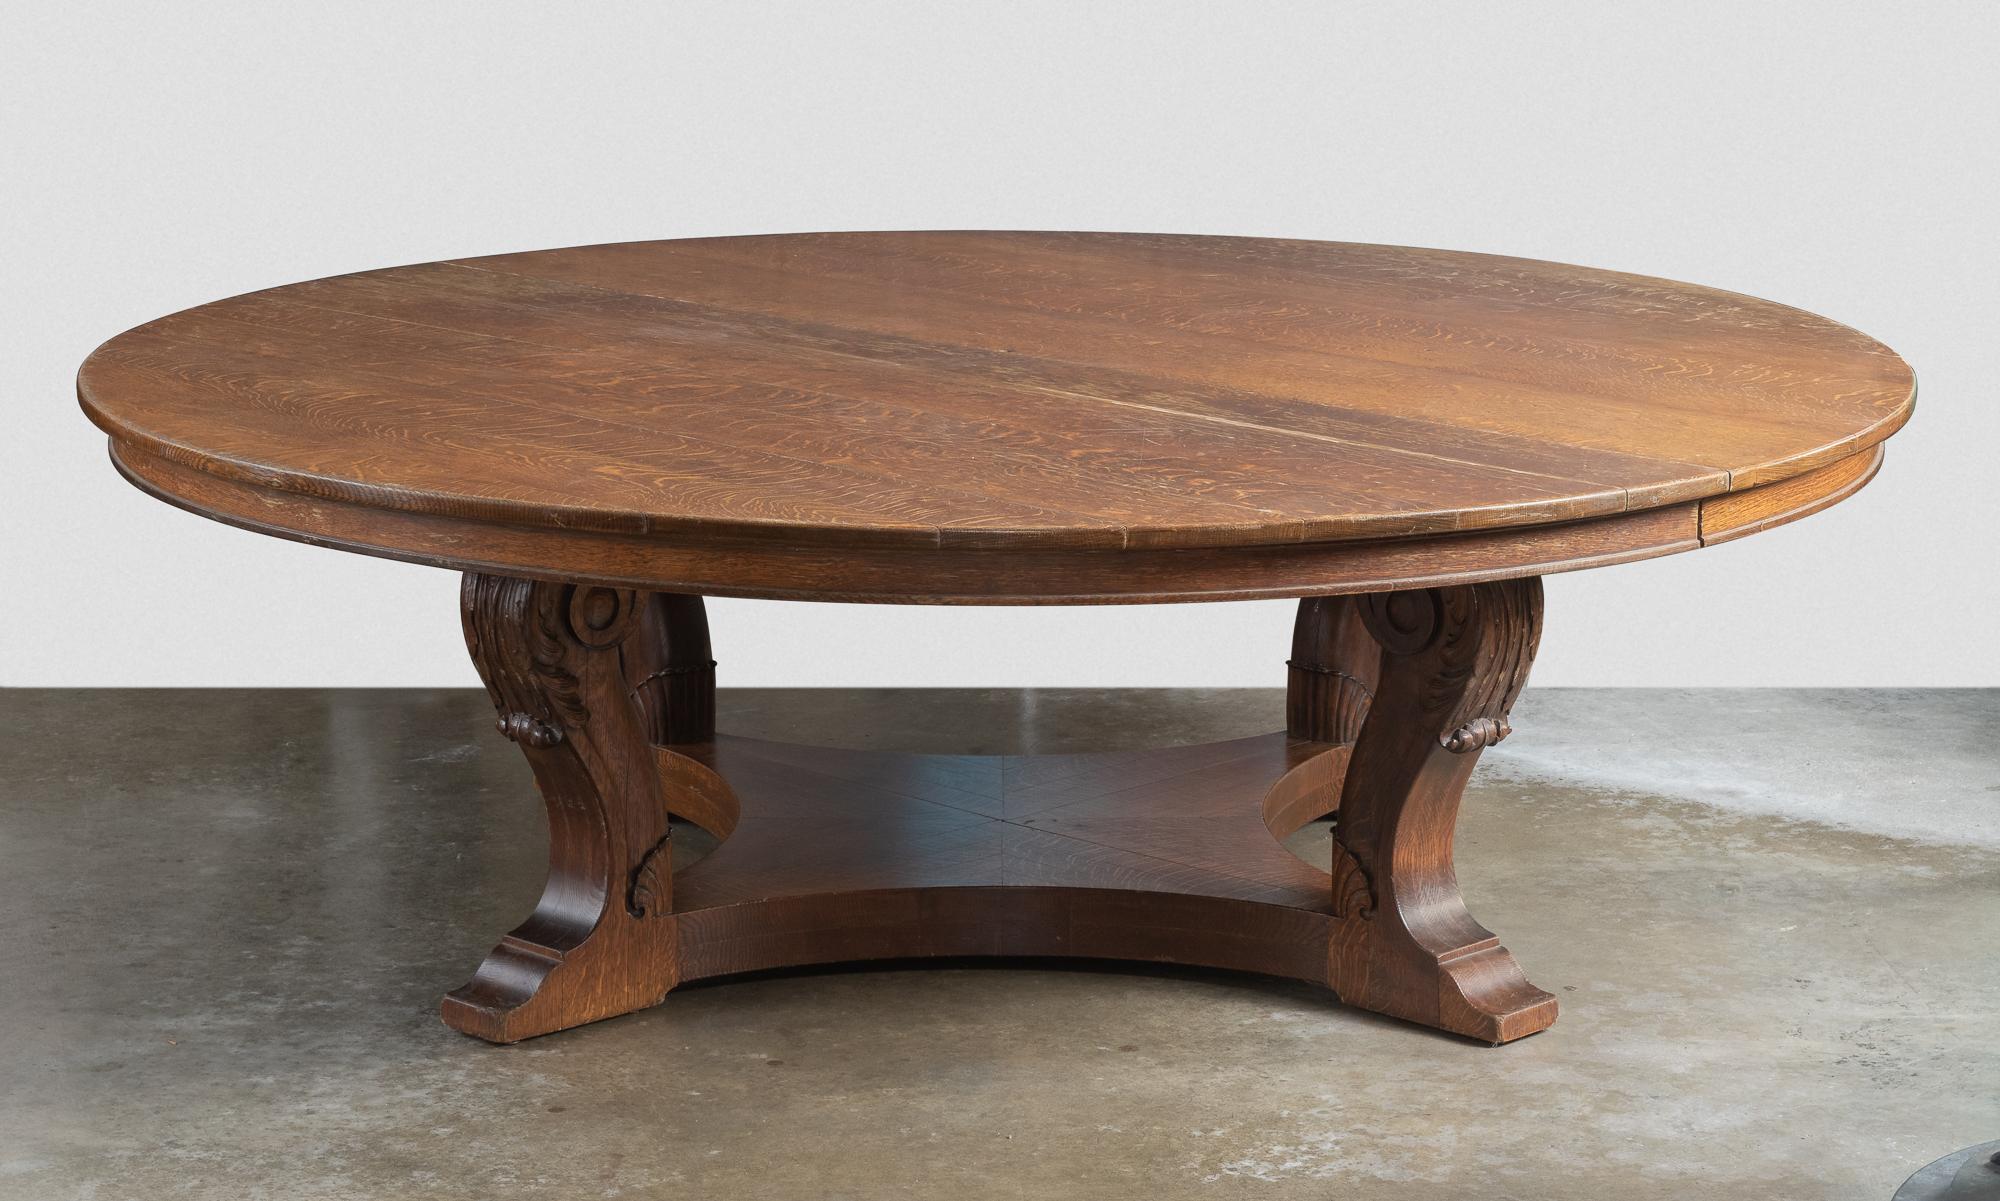 Oak library table, circa 19th century

Beautiful form includes amazing wood grain, substantial base and intricately detailed legs. Originally used at Yale University, New Haven, CT.

This piece ships from Providence, Rhode Island.